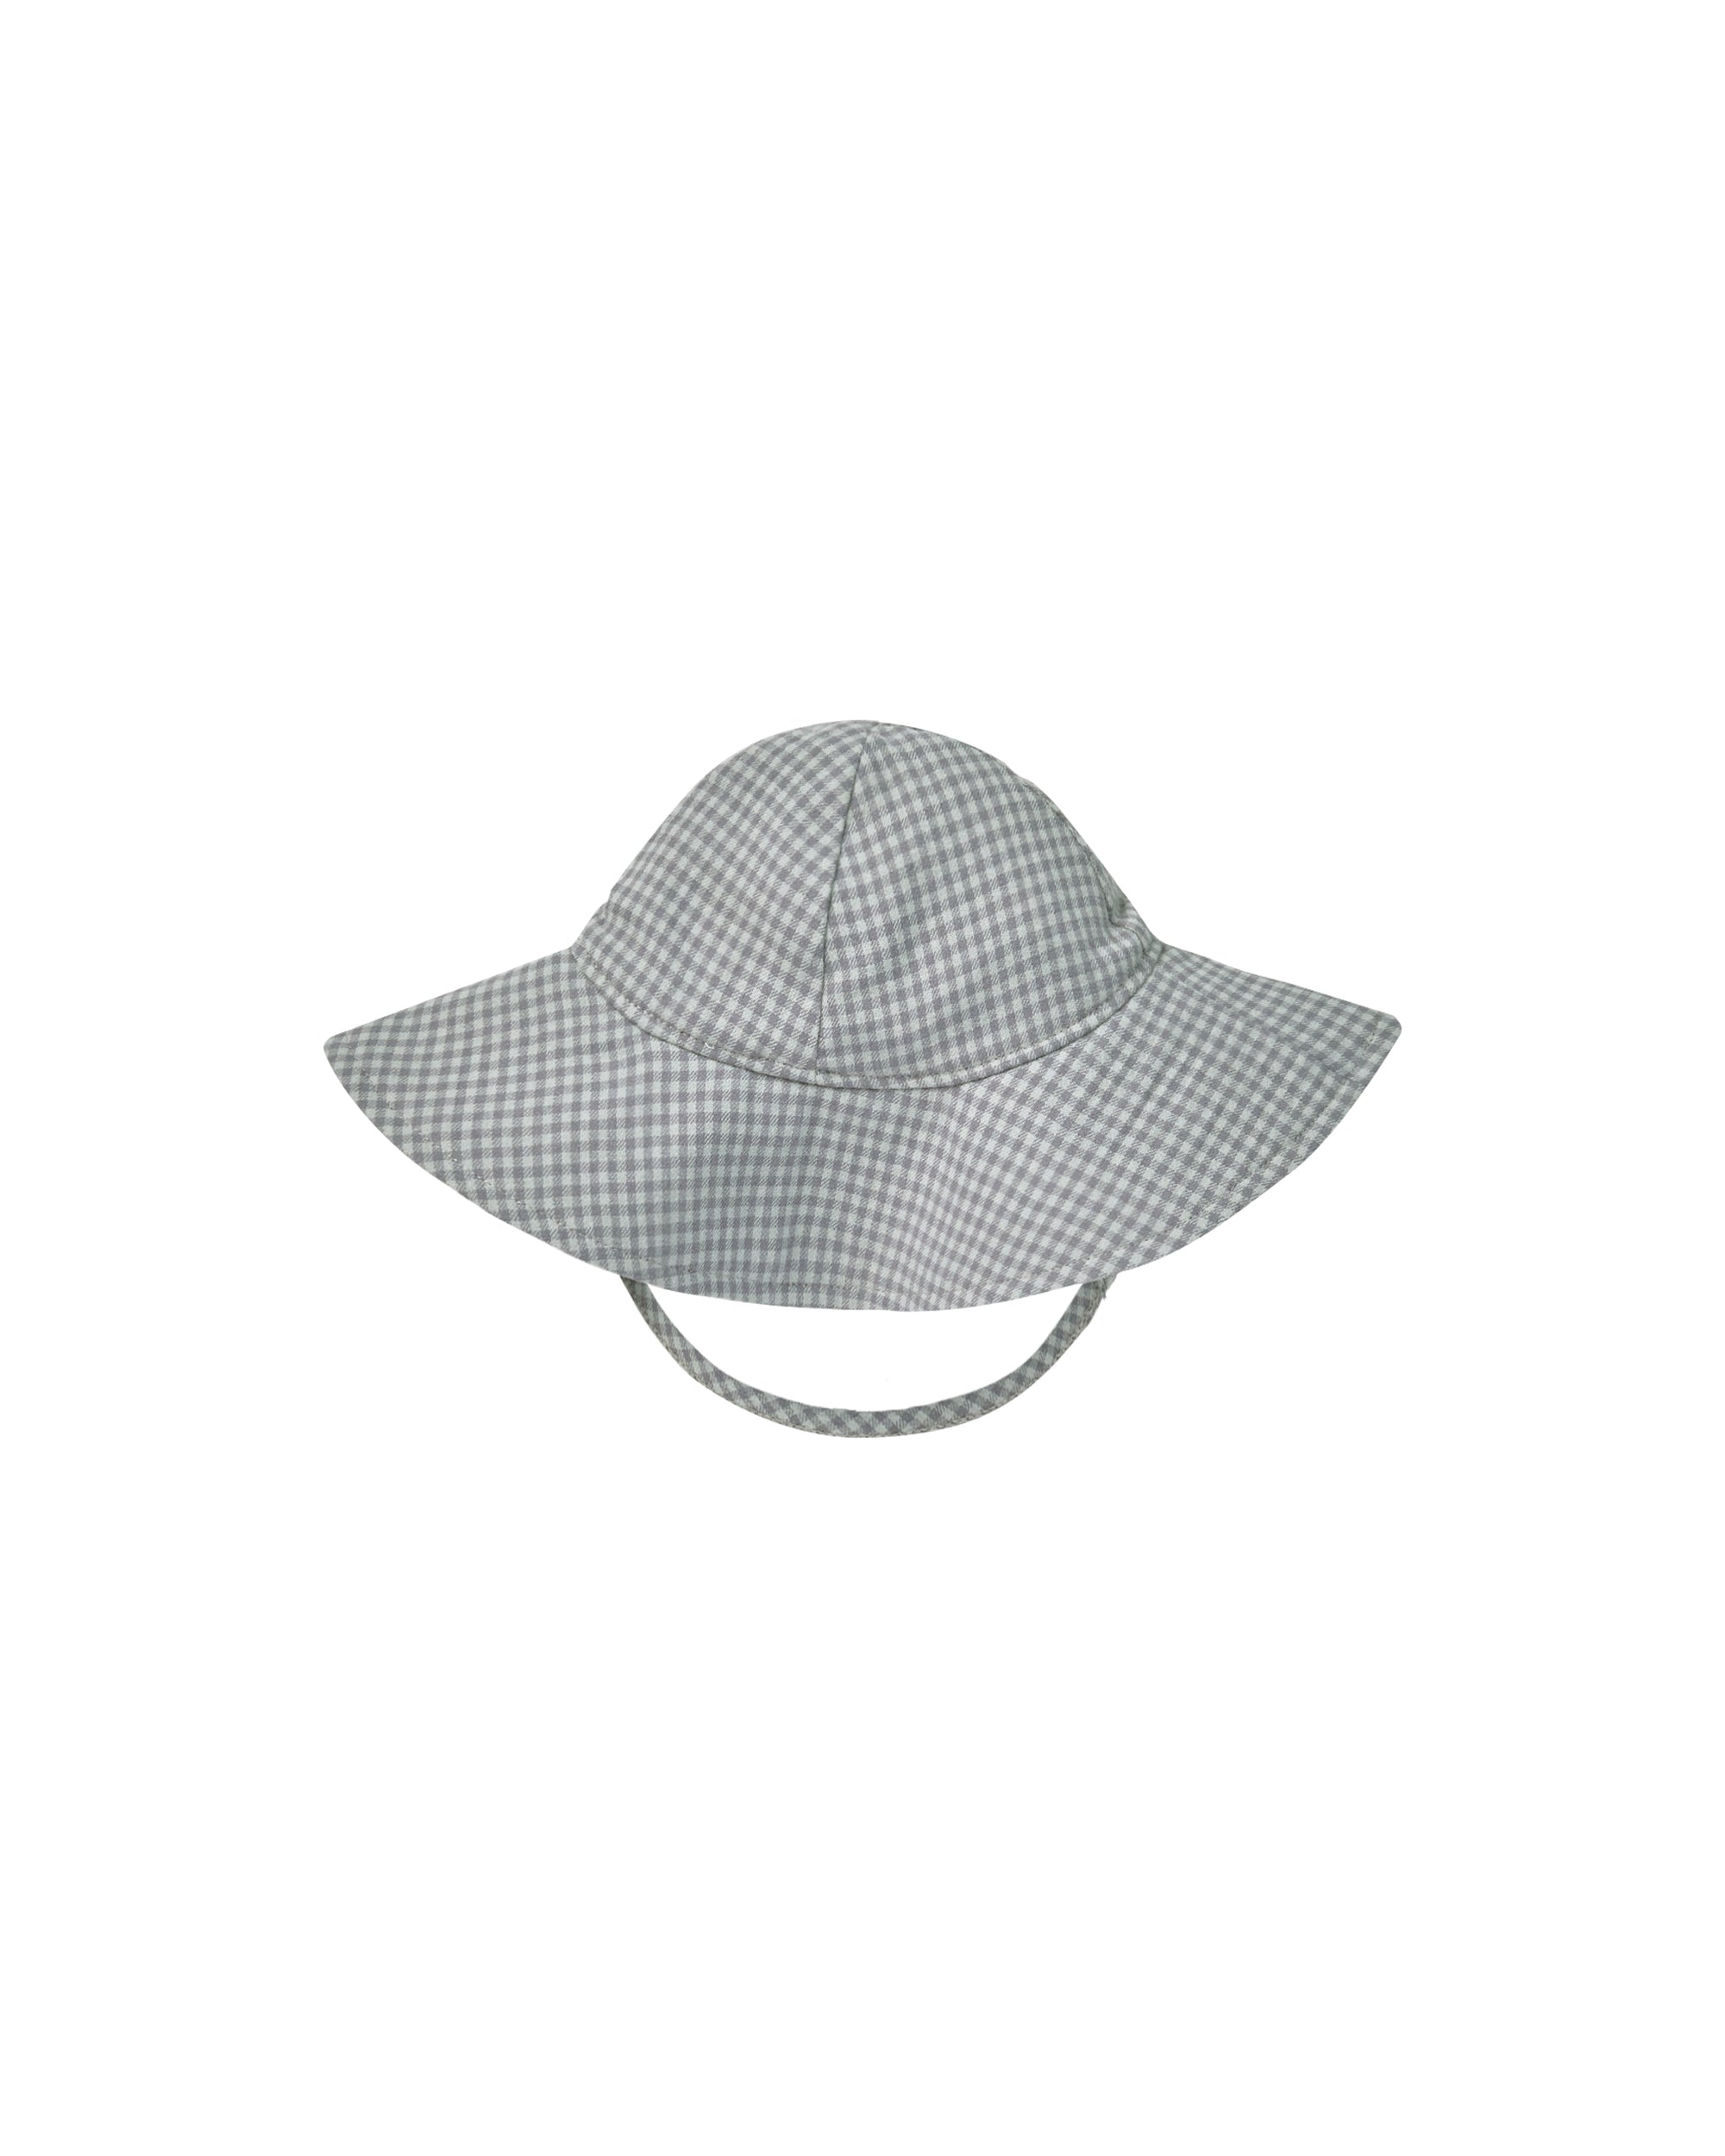 Quincy Mae Woven Sun Hat | Blue Gingham